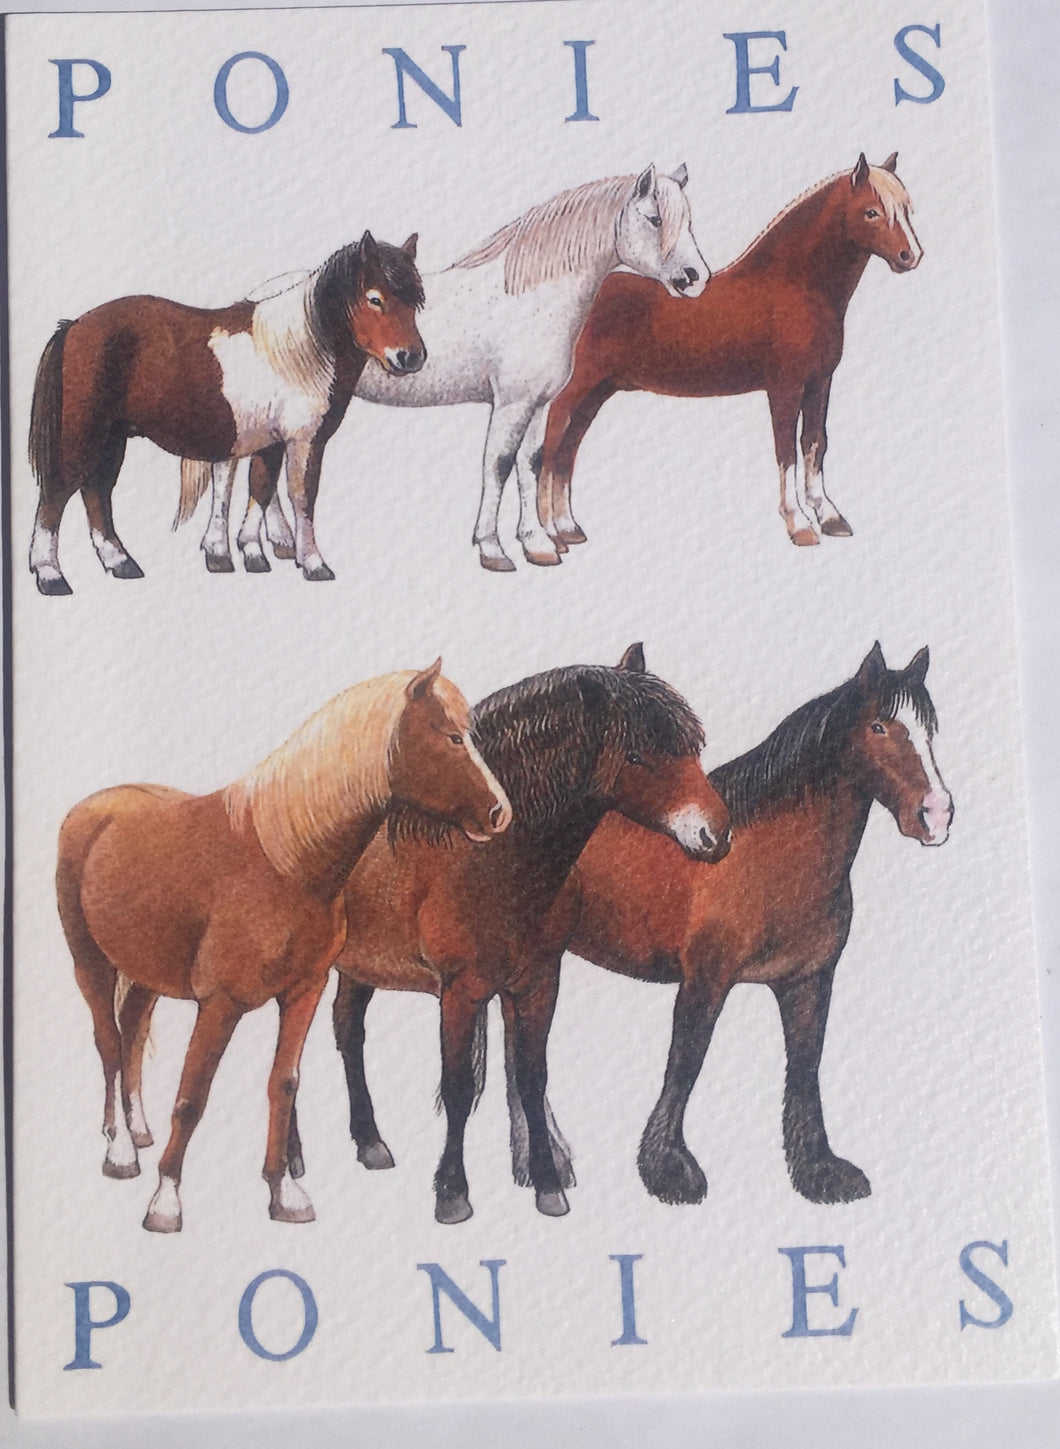 Ponies - The Alresford Gift Shop